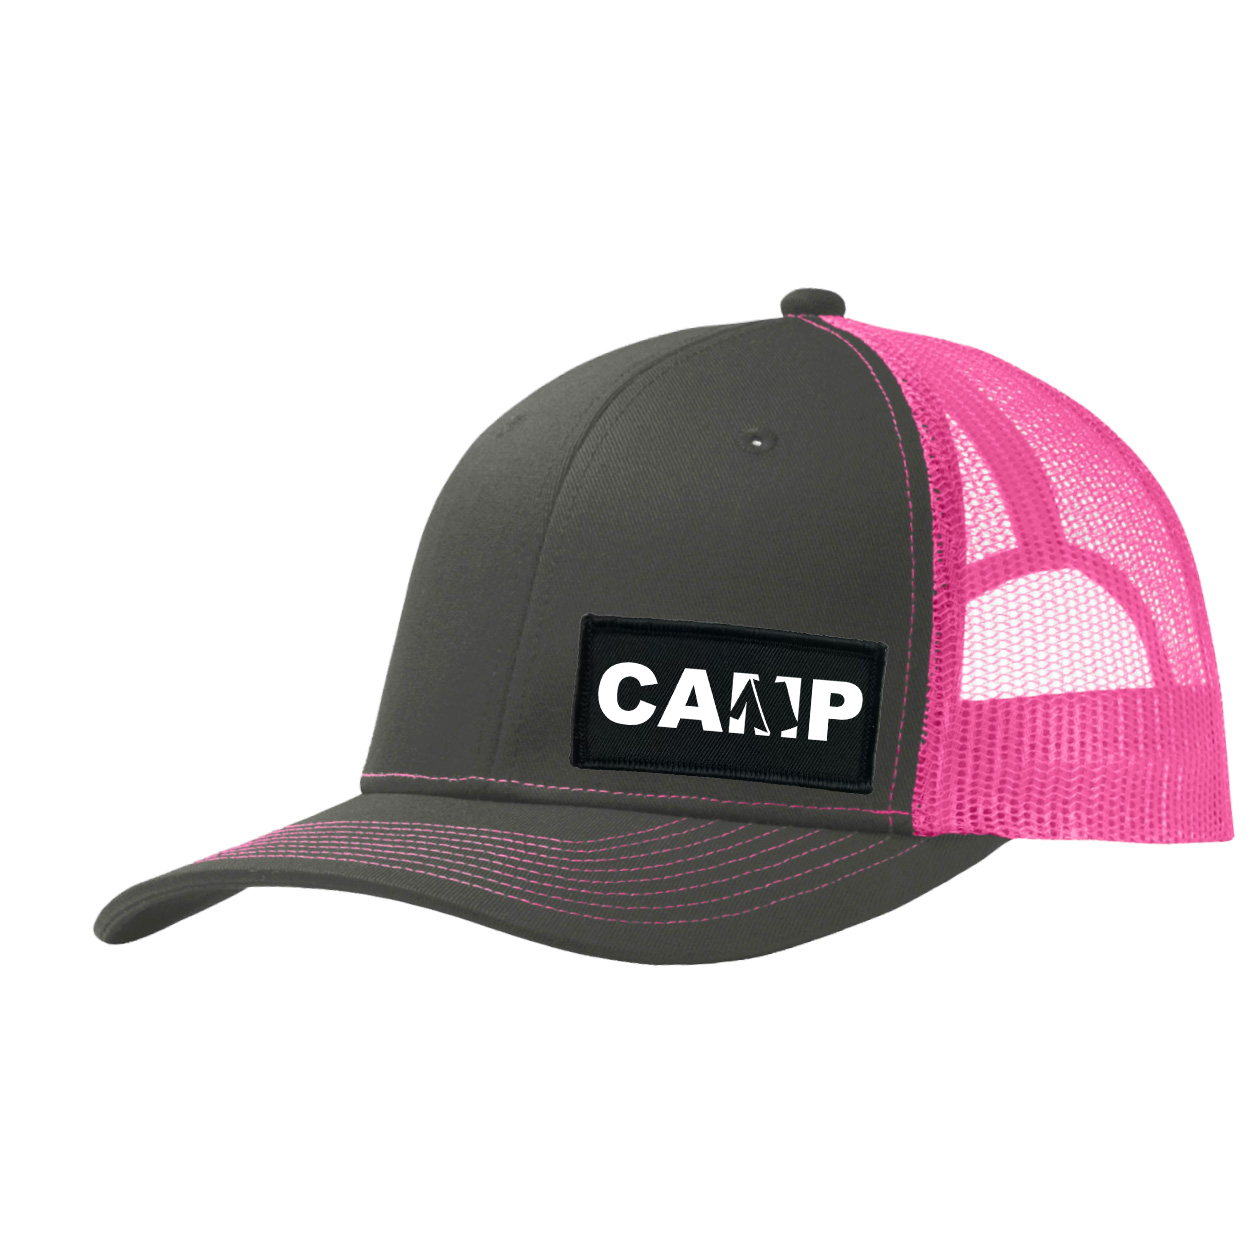 Camp Tent Logo Night Out Woven Patch Snapback Trucker Hat Dark Gray/Neon Pink (White Logo)